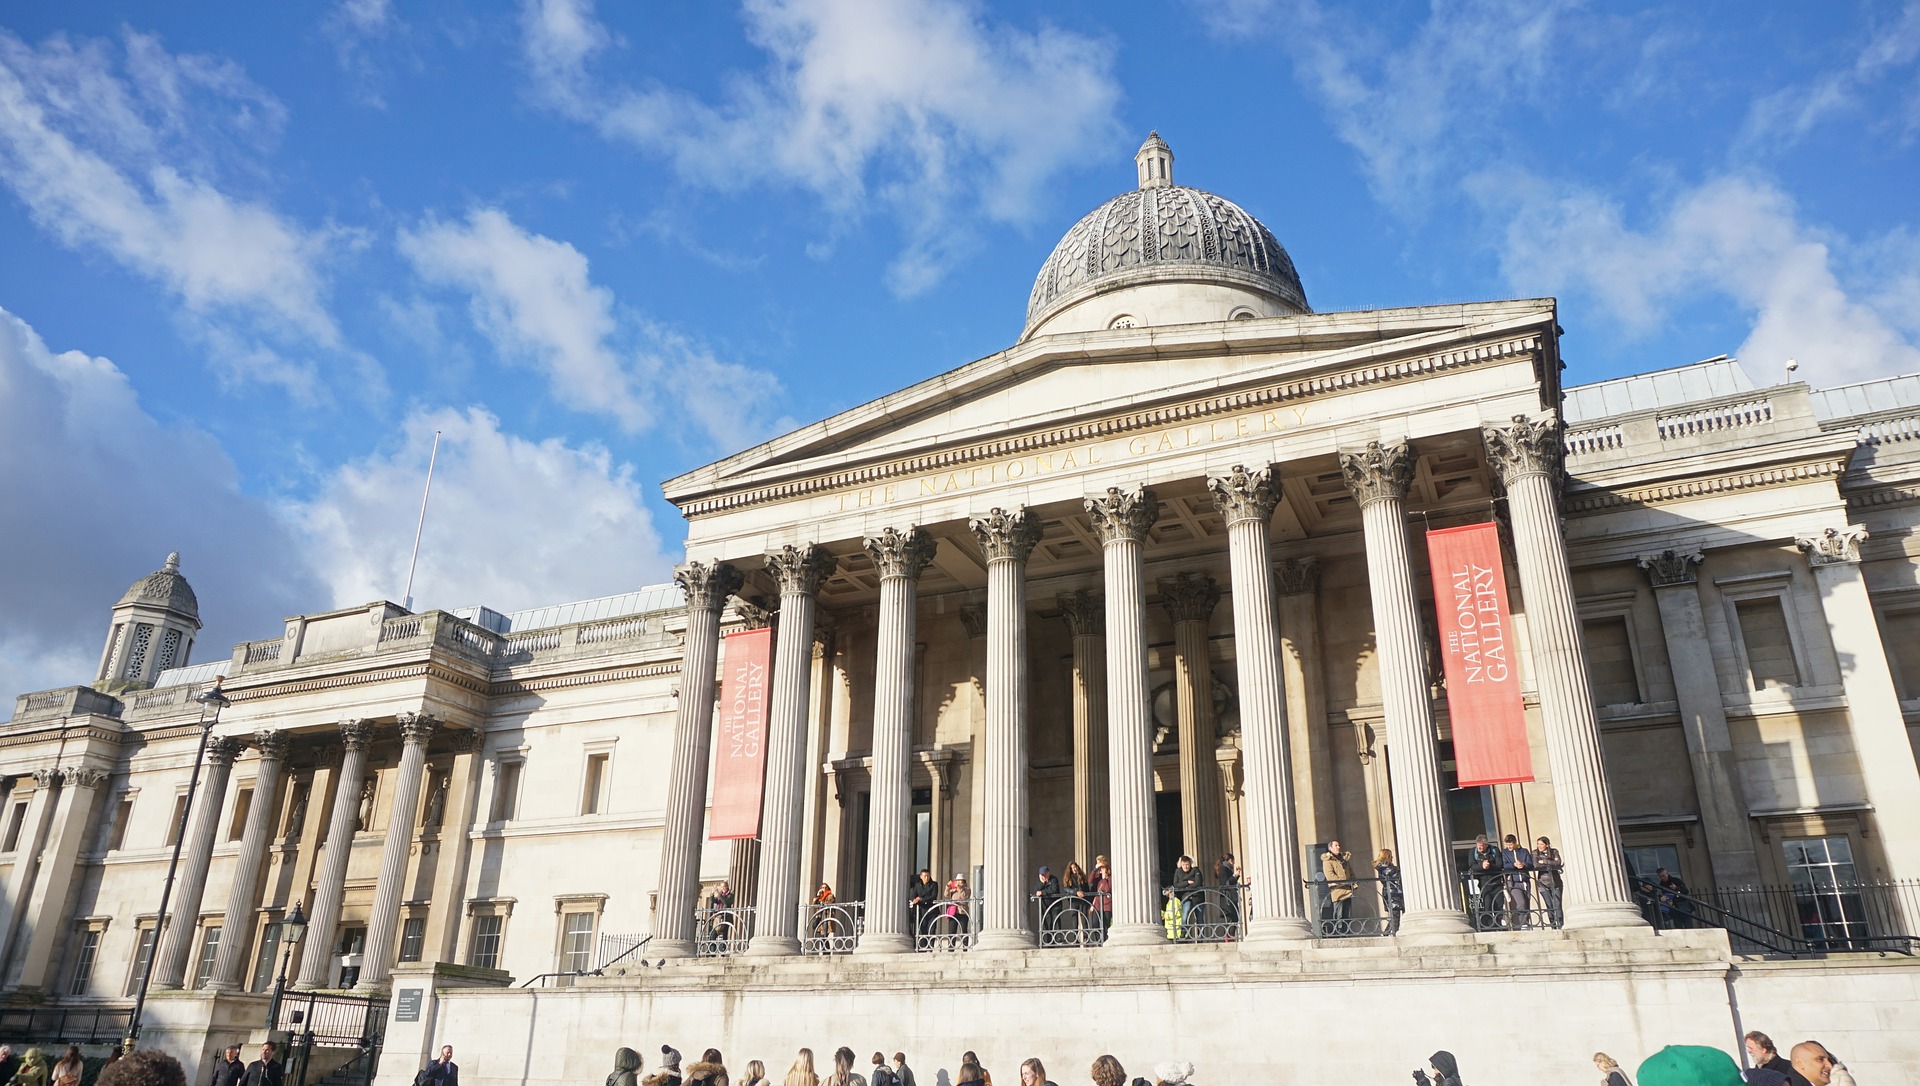 England Travel Tips: The British Museum